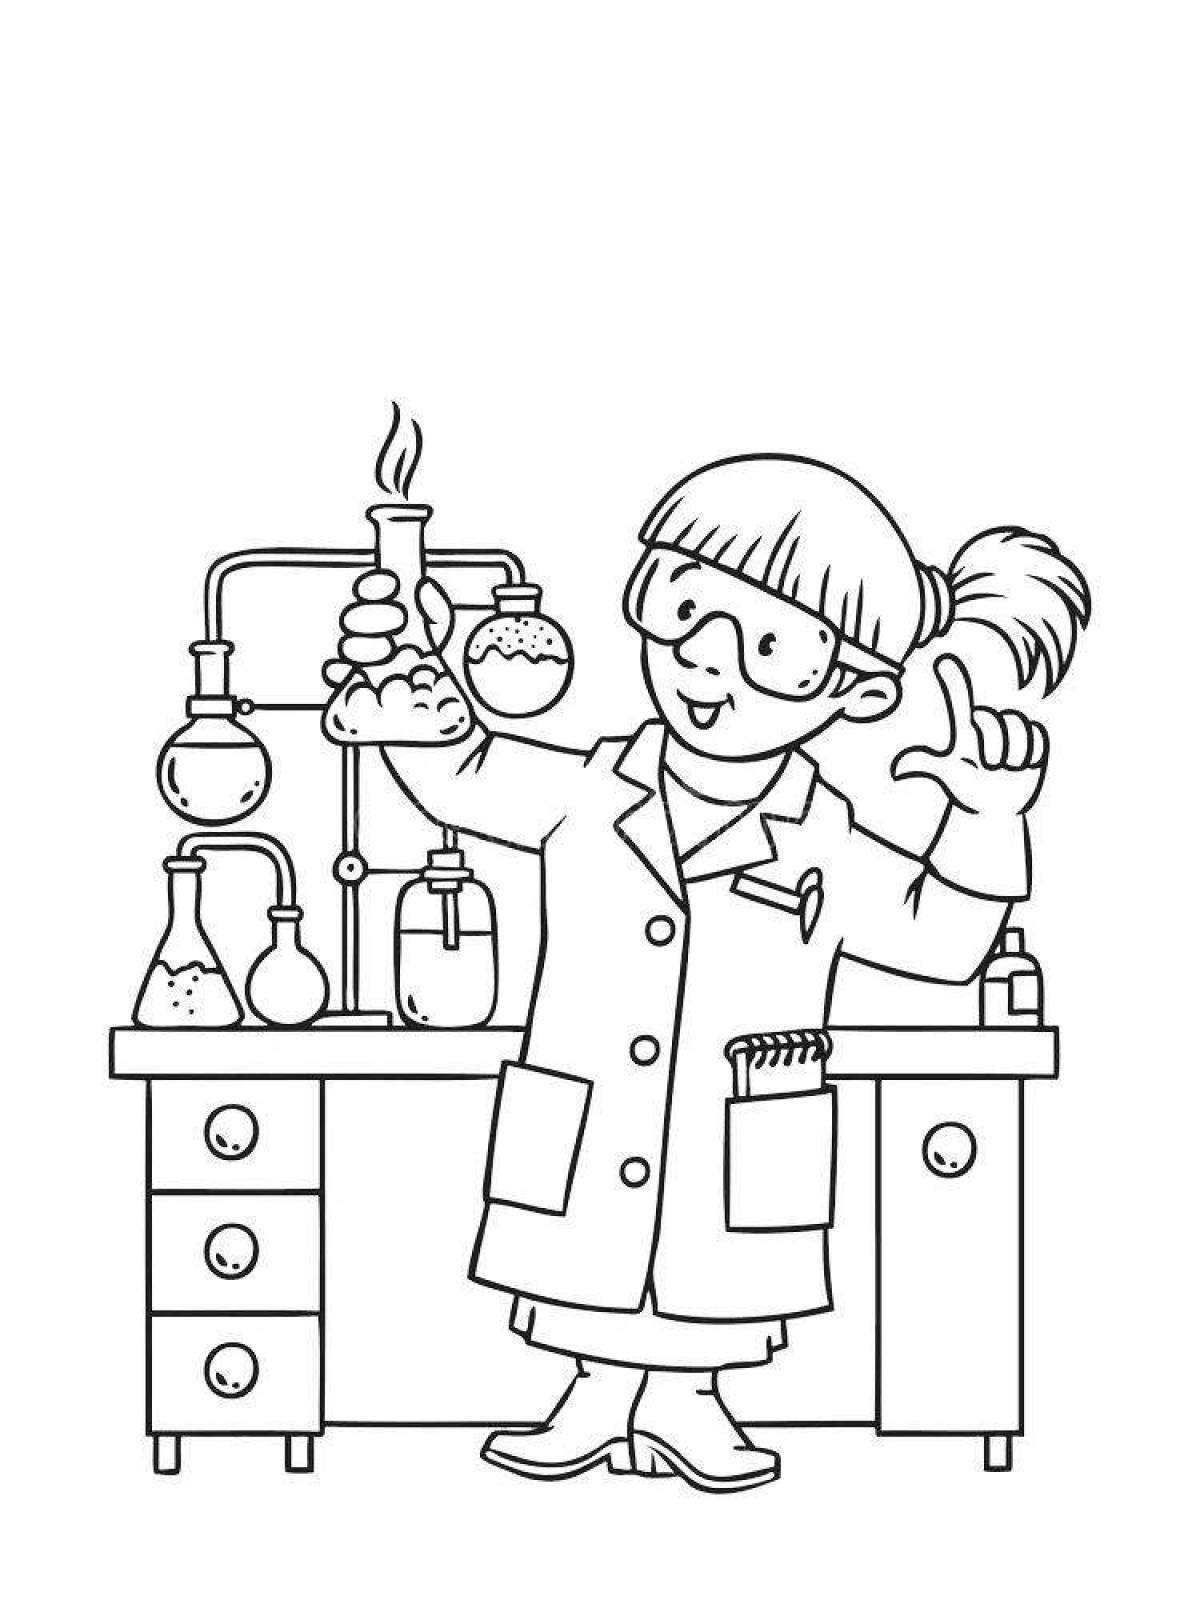 Adorable science and technology coloring page